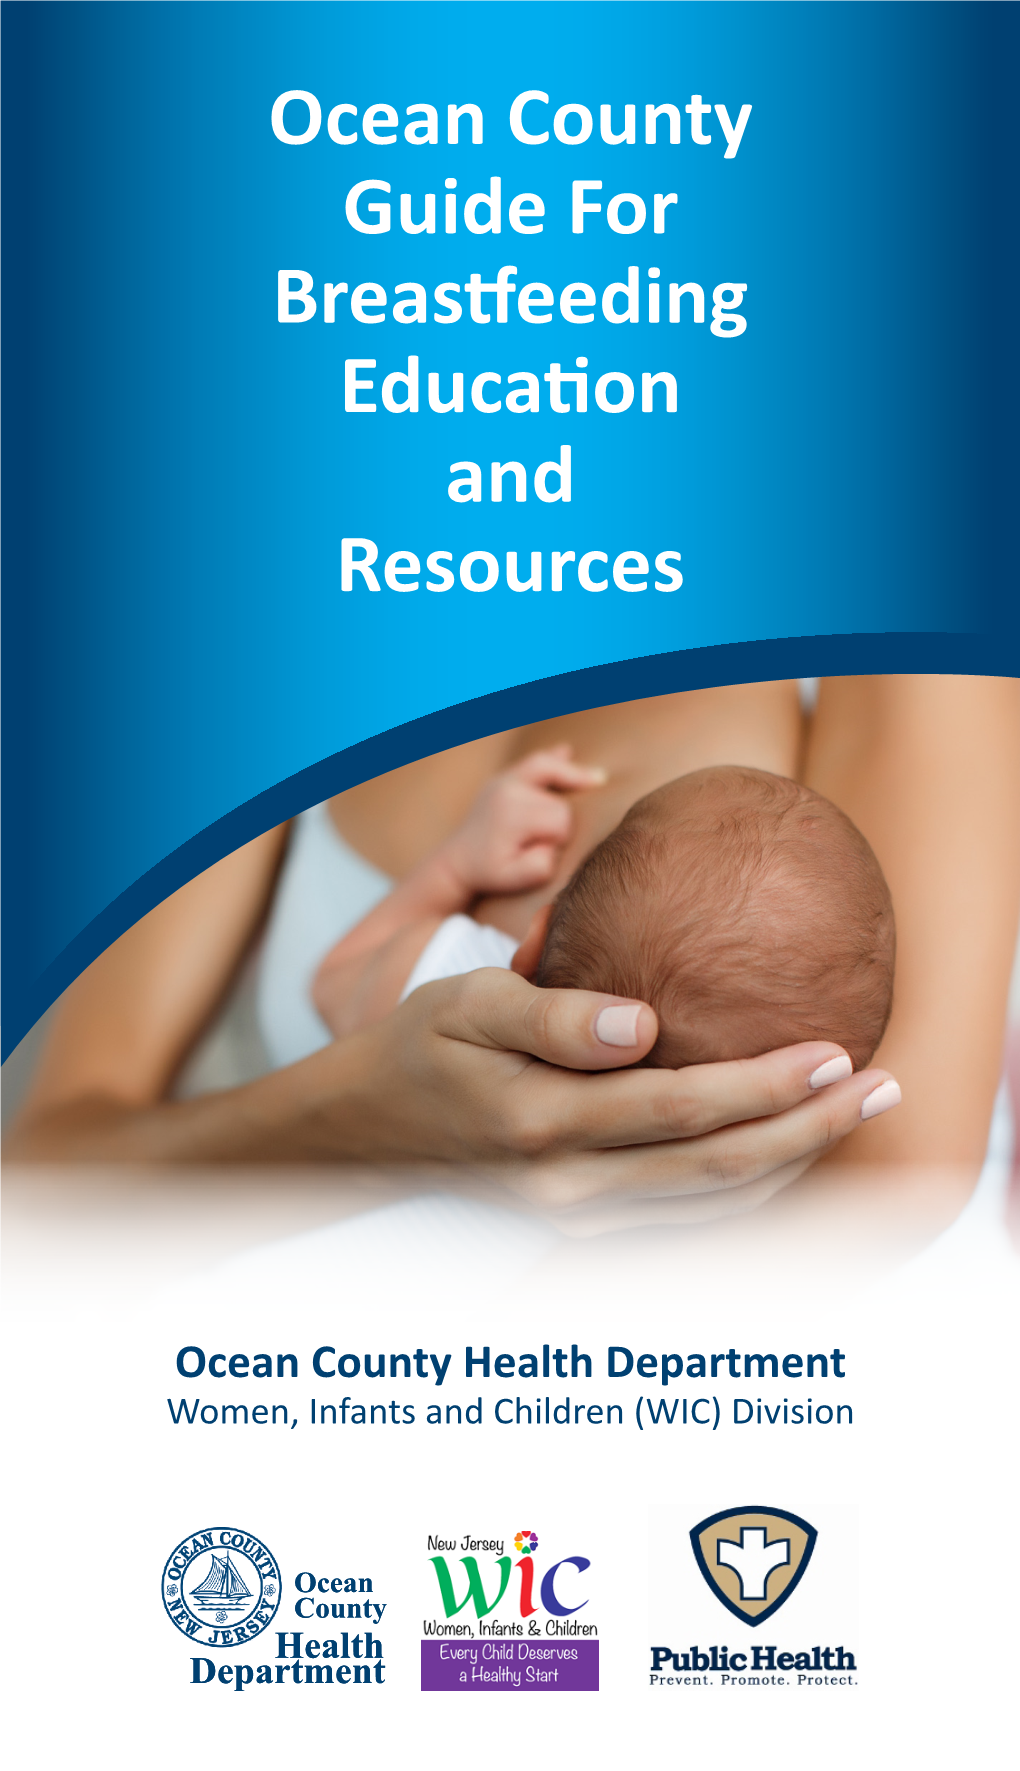 OC Guide for Breastfeeding Education and Resources